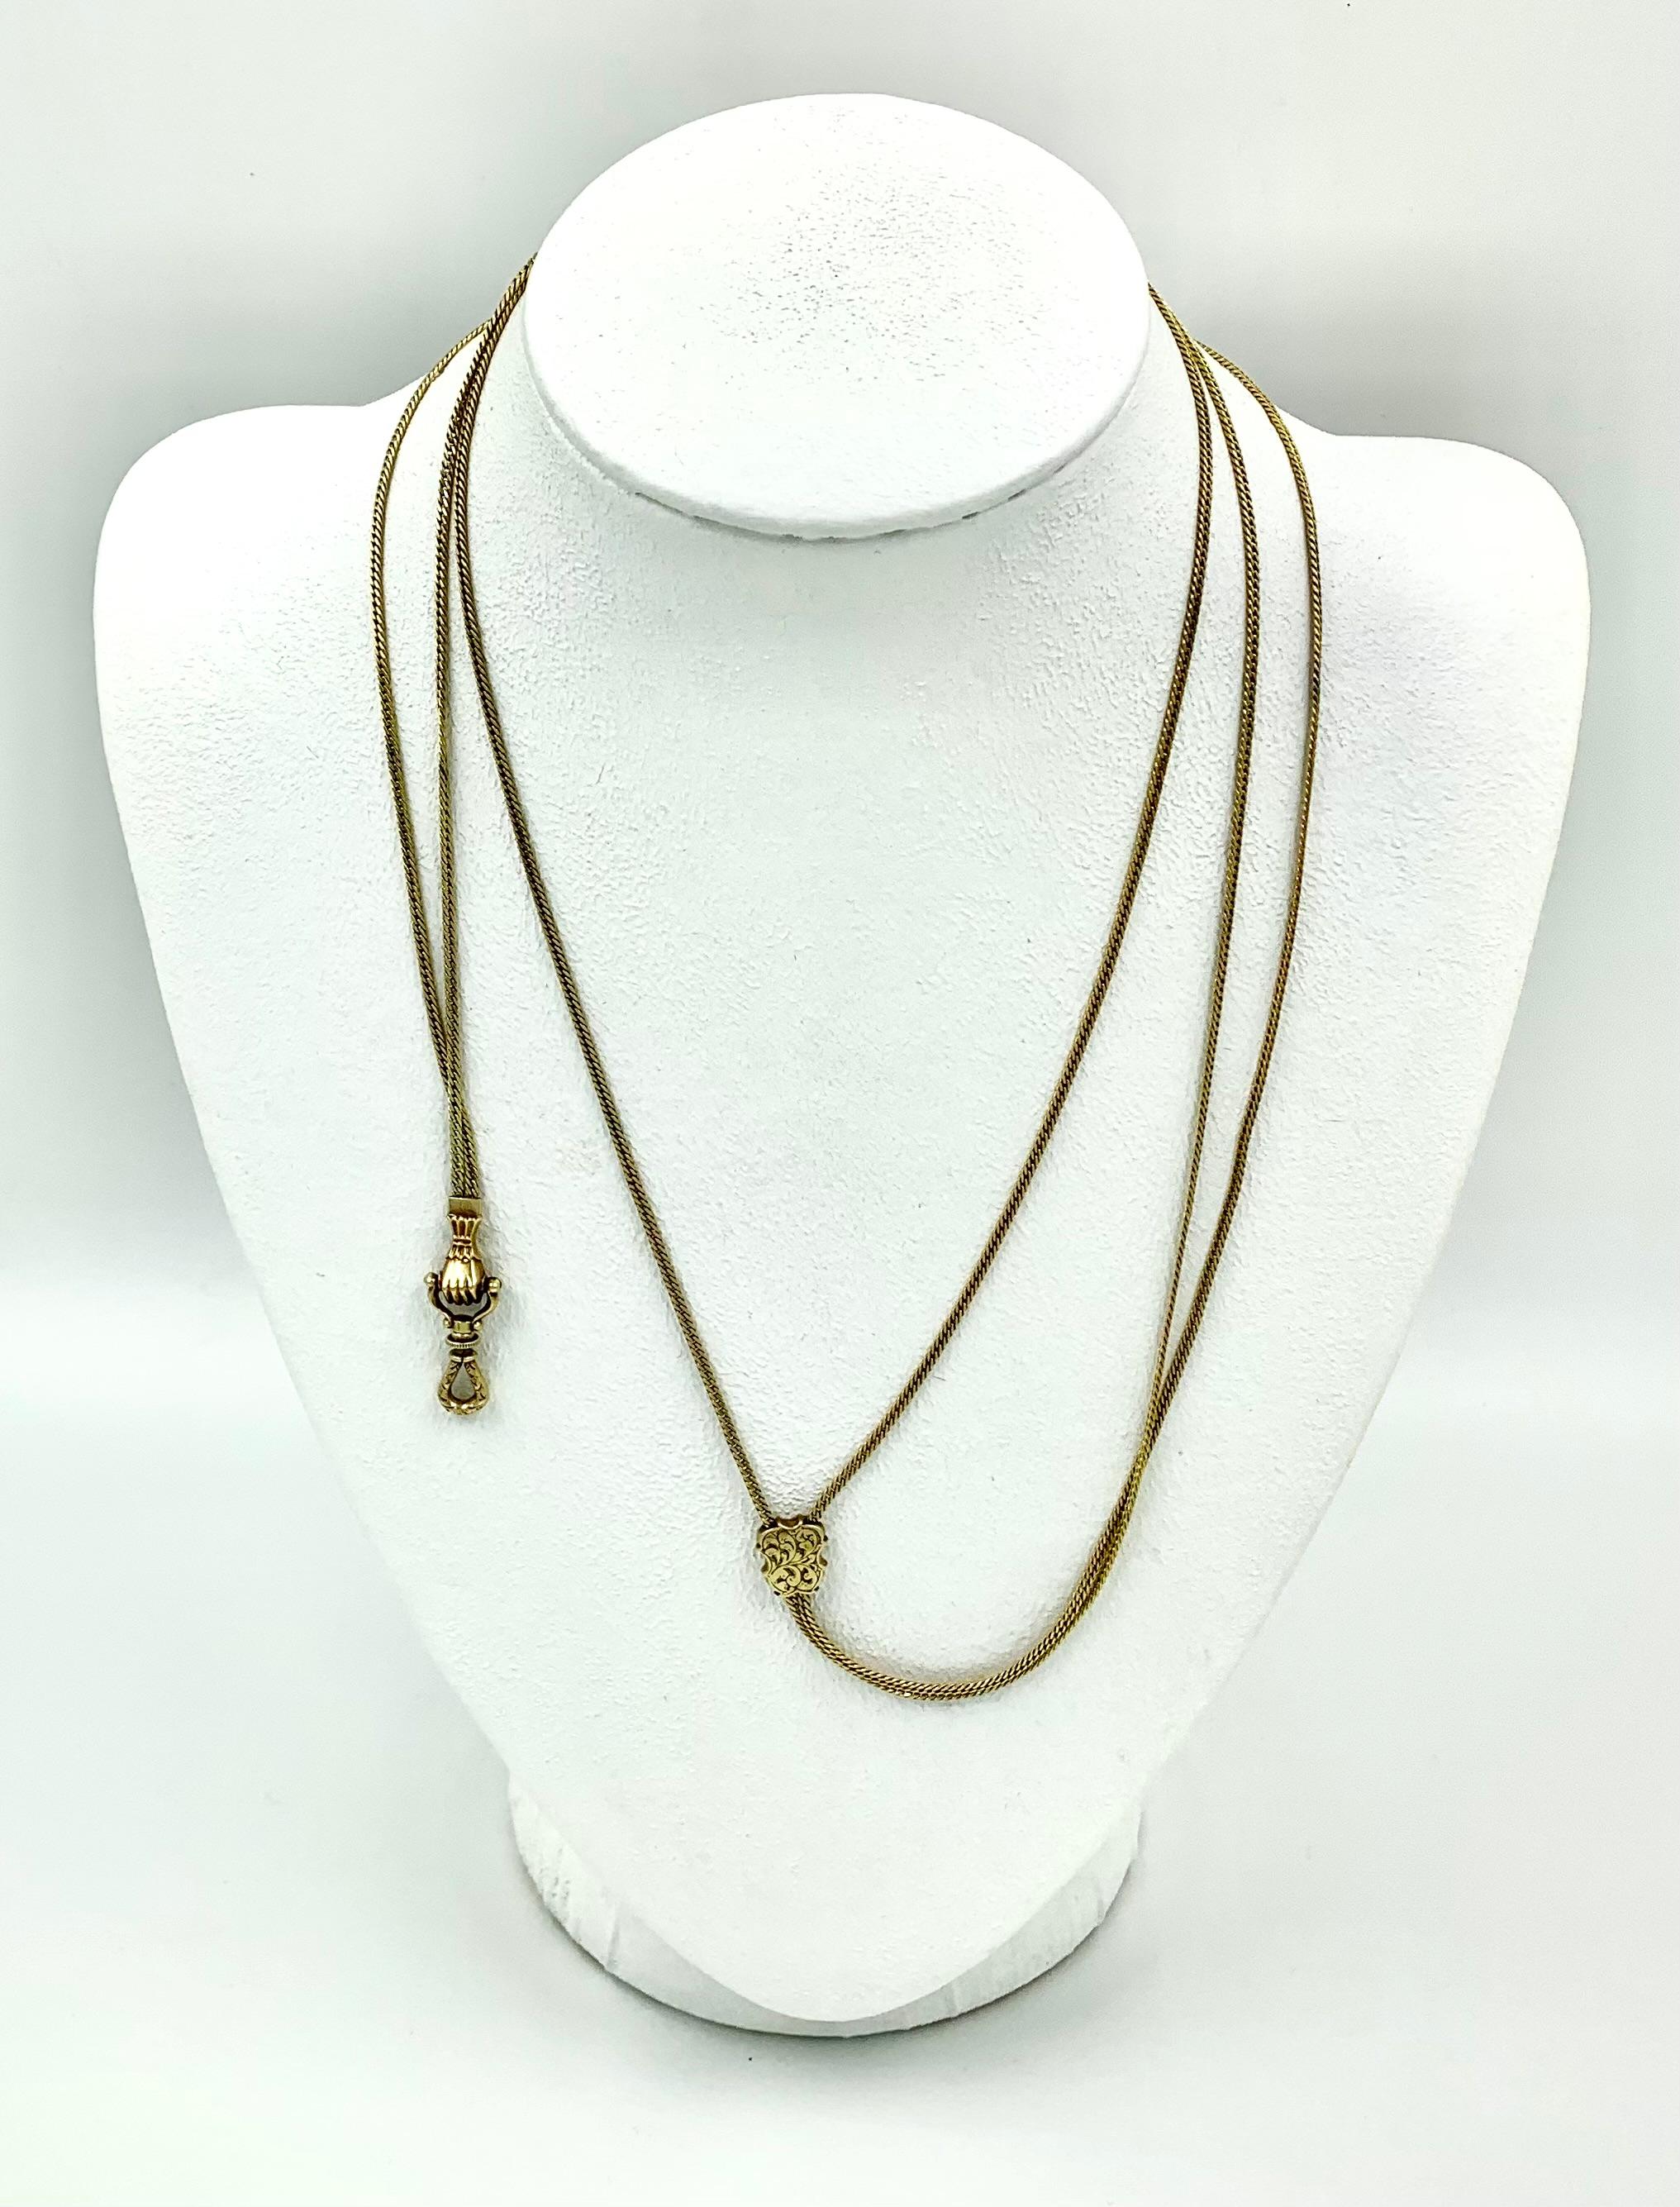 Exceptionally Long Antique 18K Gold Mano Sautoir Slide Chain Necklace Circa 1840 For Sale 11